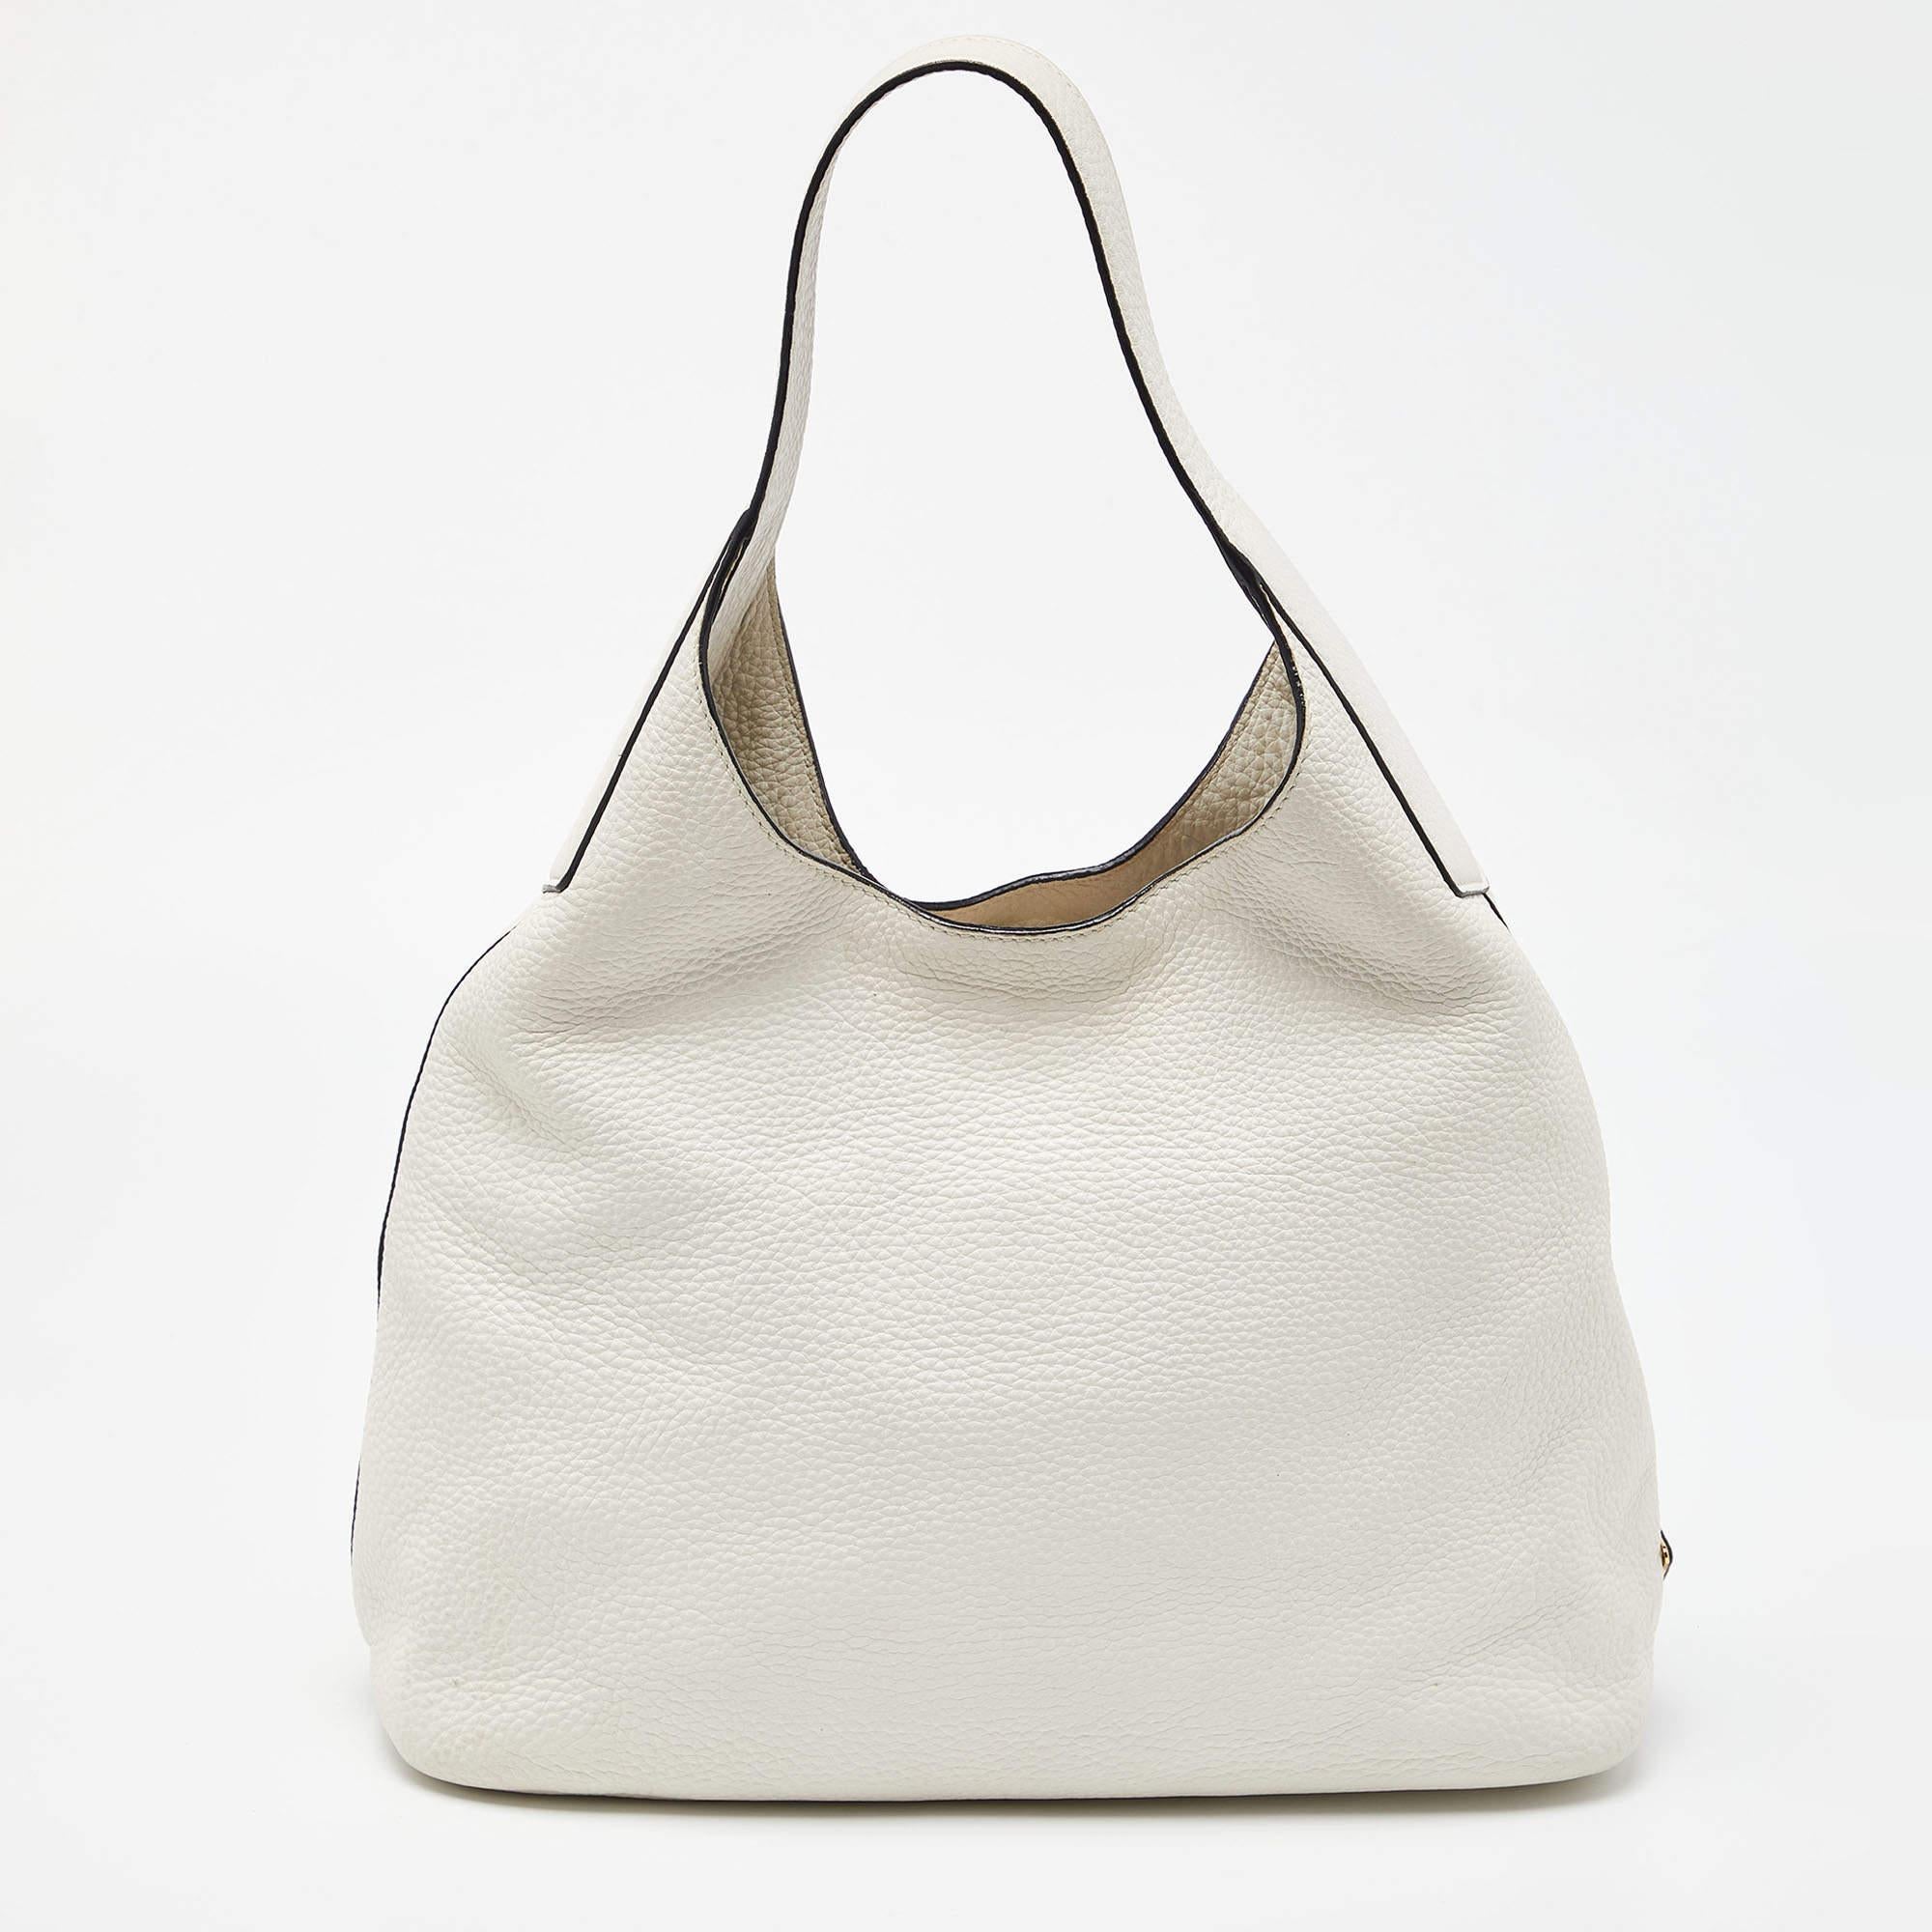 Stylish handbags never fail to make a fashionable impression. Make this designer hobo yours by pairing it with your sophisticated workwear as well as chic casual looks.

Includes: Info Booklet, Authenticity card